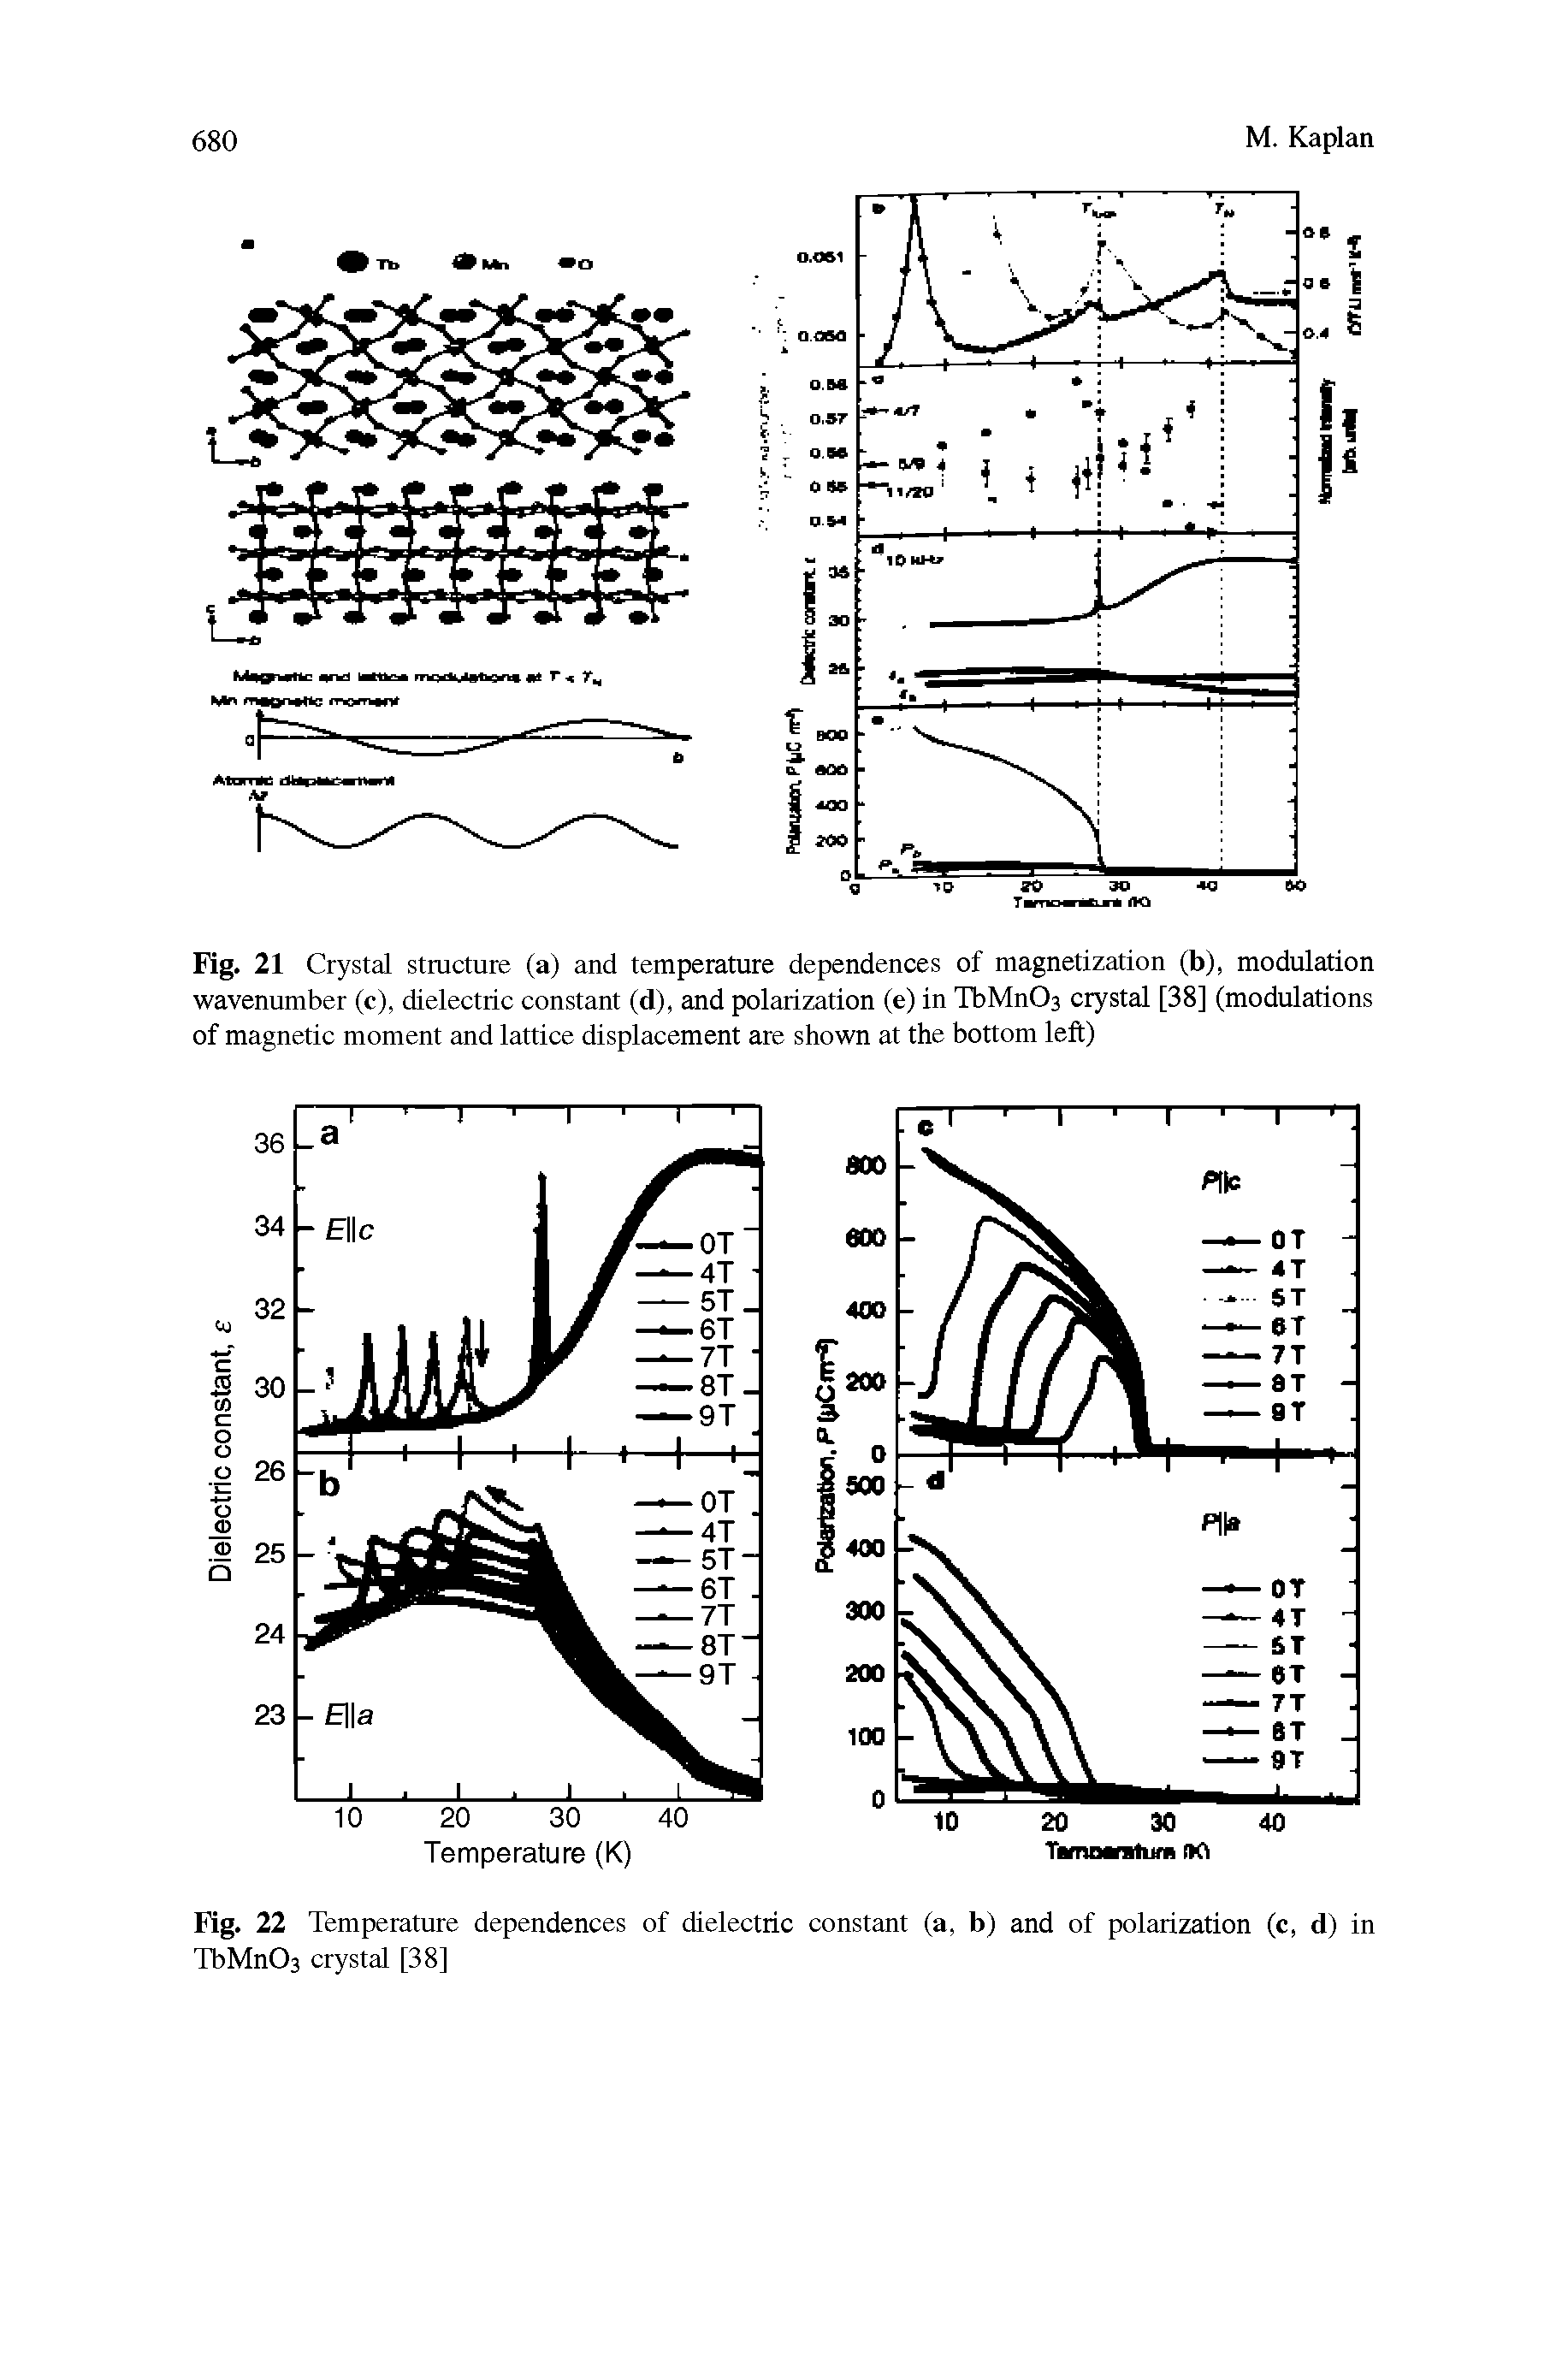 Fig. 21 Crystal structure (a) and temperature dependences of magnetization (b), modulation wavenumber (c), dielectric constant (d), and polarization (e) in TbMnOs crystal [38] (modulations of magnetic moment and lattice displacement are shown at the bottom left)...